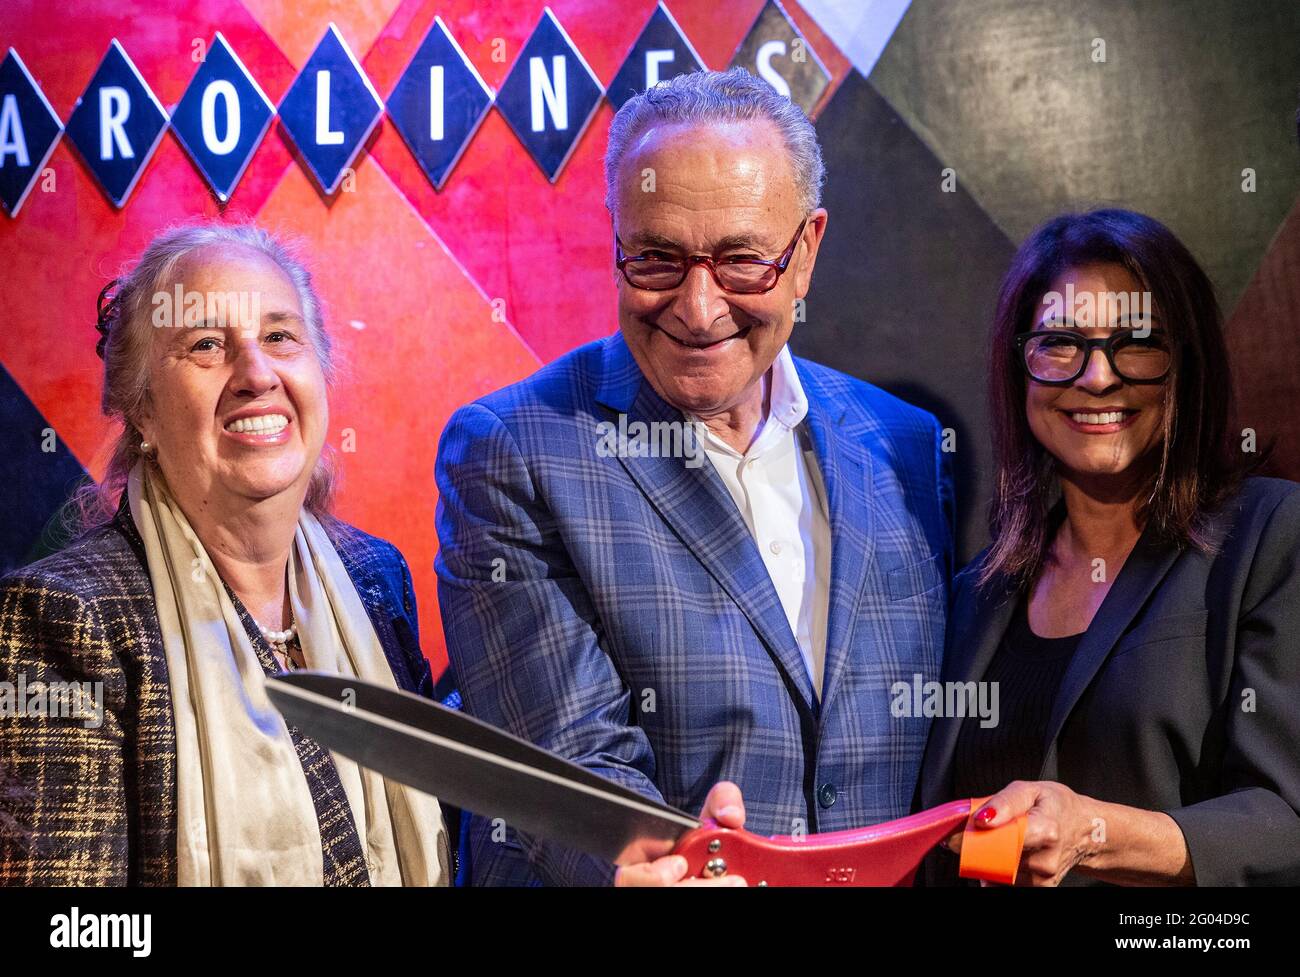 New York, United States. 31st May, 2021. Manhattan Borough President Gale Brewer, U. S. Senator Charles Schumer, Caroline Hirsch cut ribbon with others at Carolines on Broadway comedy club re-opening after pandemic ceremony. Senator Charles Schumer lauded Safe our Stages (SOS) bill passed by Senate to help cultural venues to survive pandemic. He also cracked few jokes saying it is comedy club he does not have a choice but say them. (Photo by Lev Radin/Pacific Press) Credit: Pacific Press Media Production Corp./Alamy Live News Stock Photo